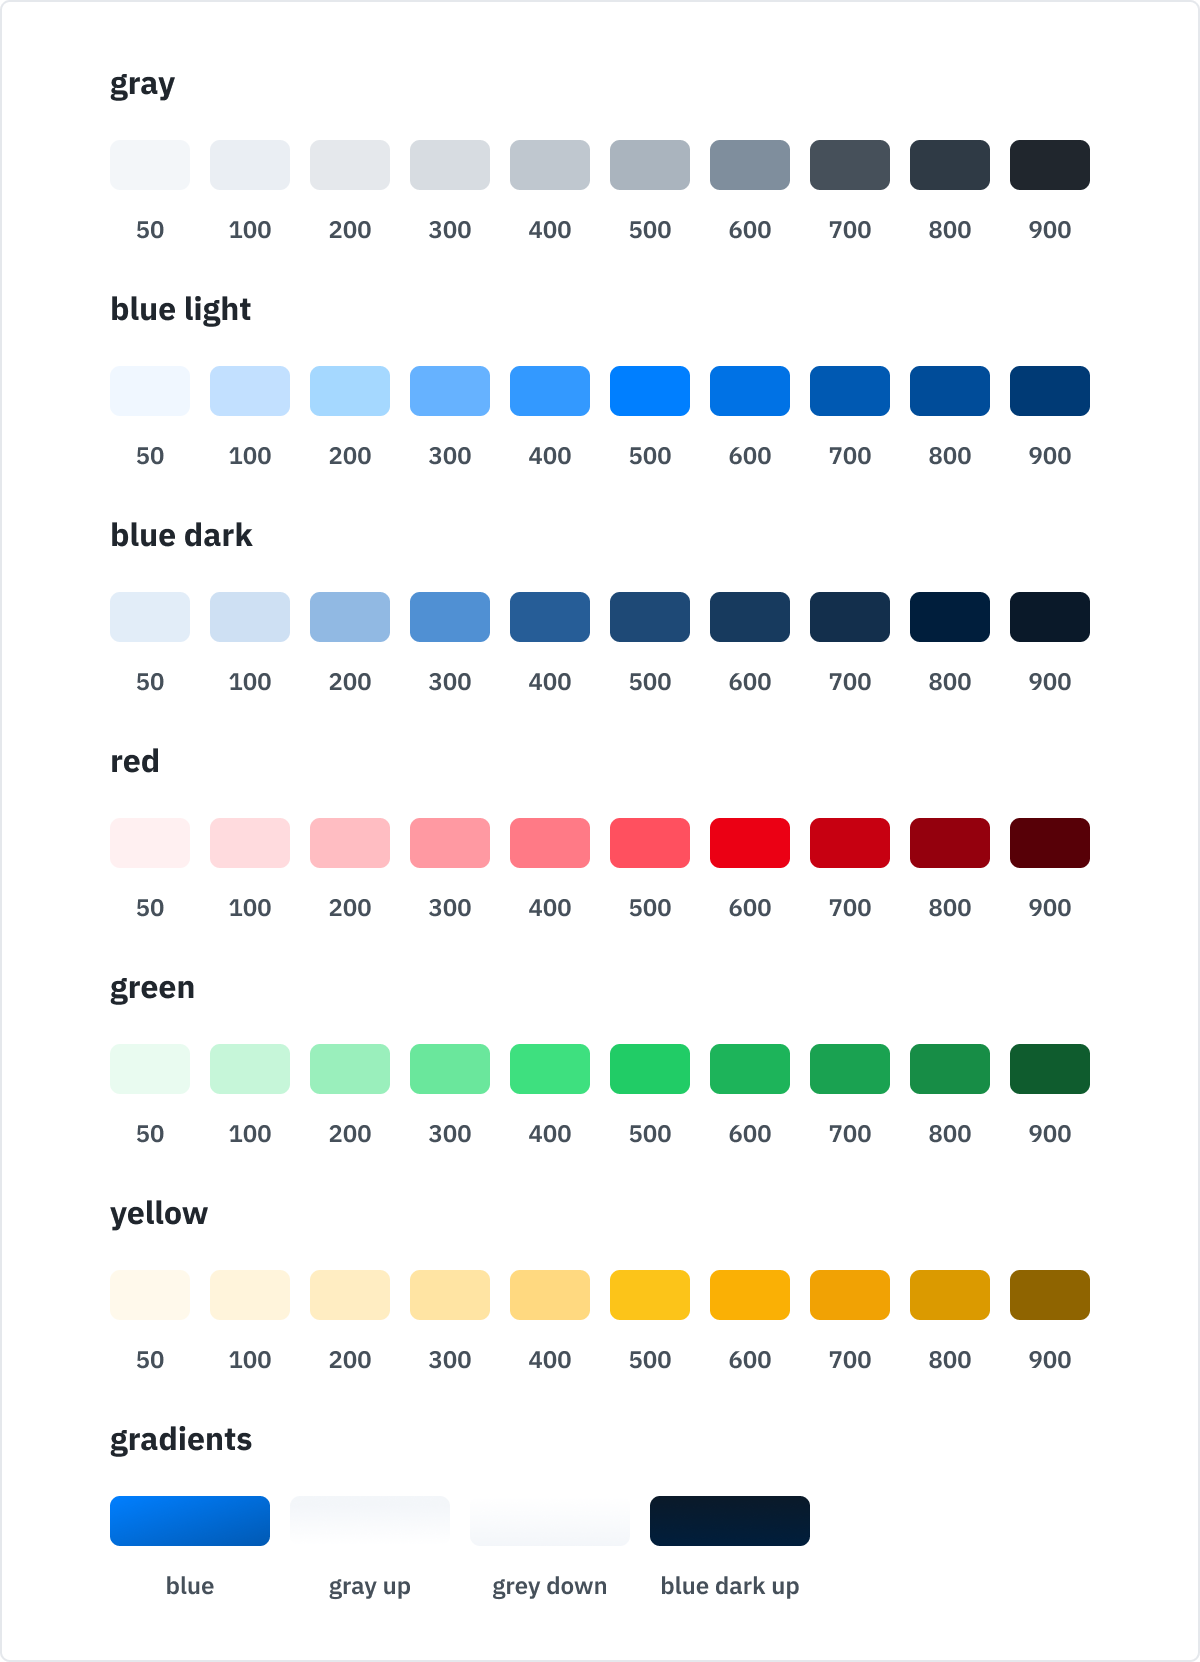 Selection of the new color palette and gradients